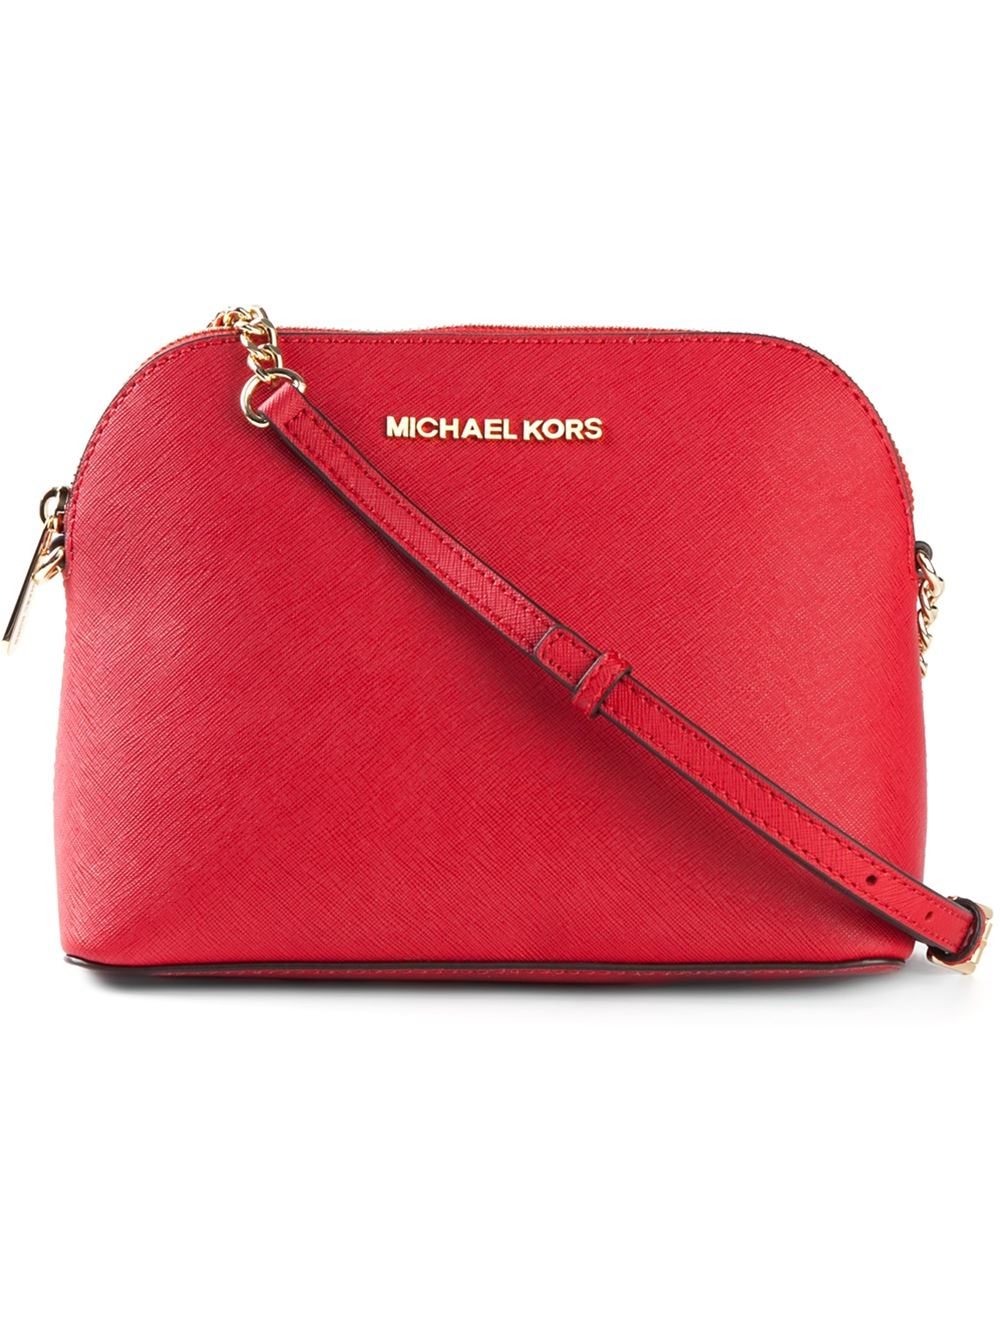 Michael Kors Cindy Large Calf-Leather Cross-Body Bag in Red | Lyst